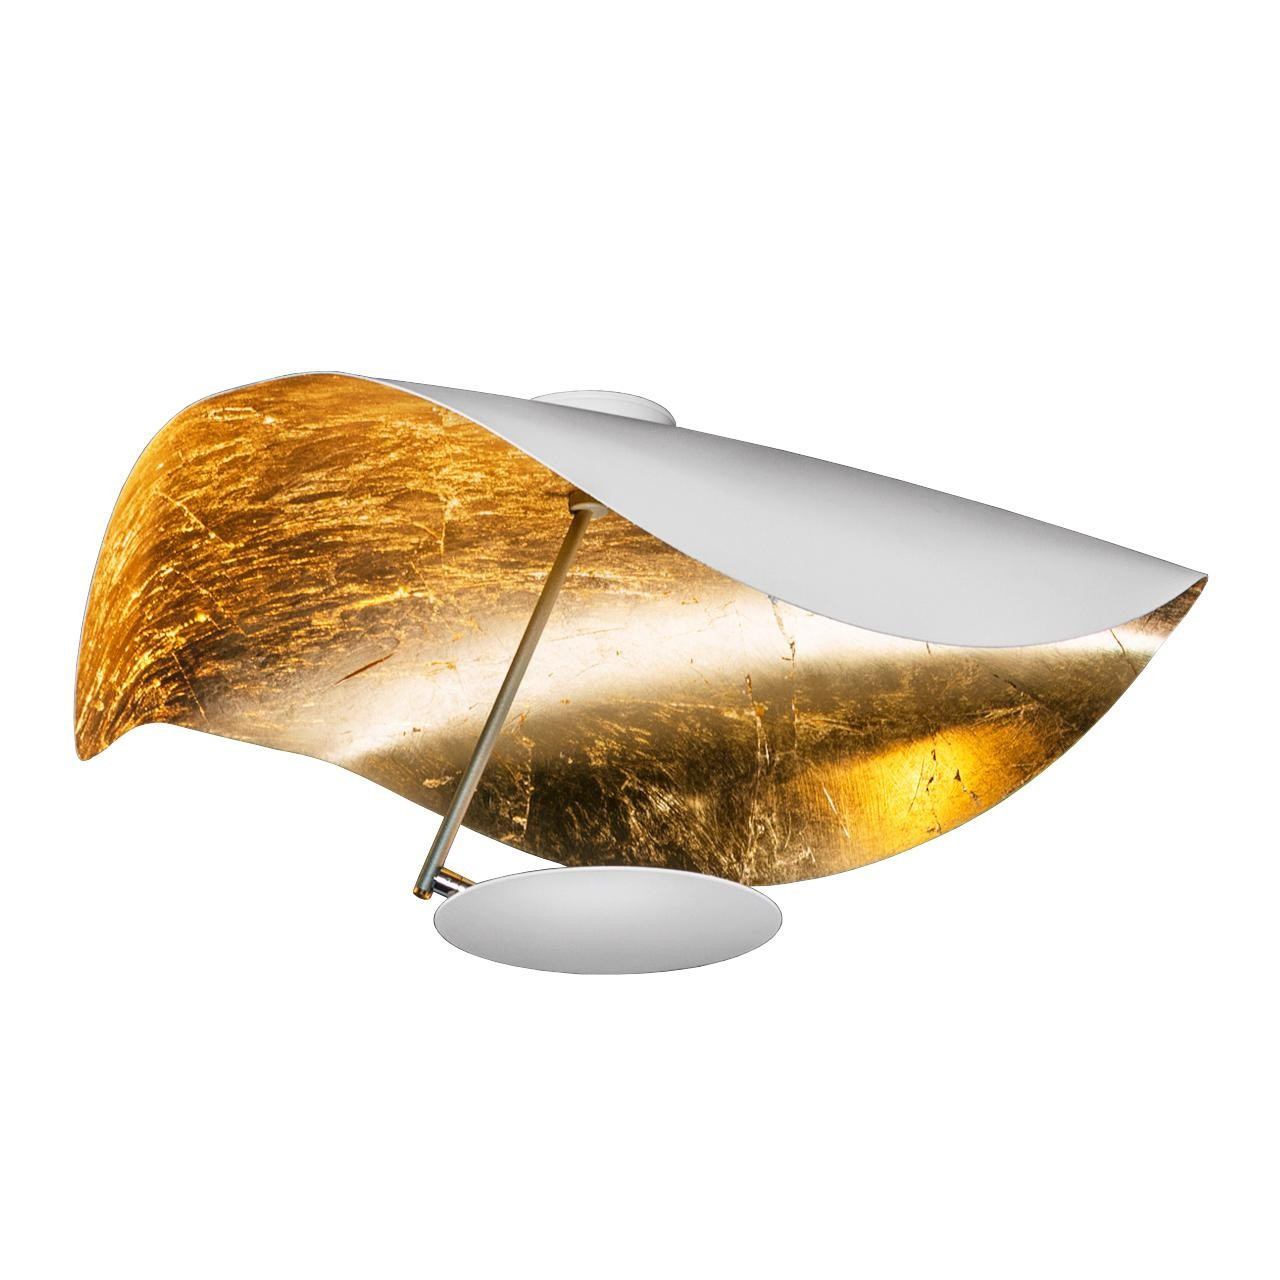 20 Elegant solid Brass Vase 2024 free download solid brass vase of catellani smith lederam manta cws1 led ceiling lamp wand lamp within exclusive sale only for styleclub members